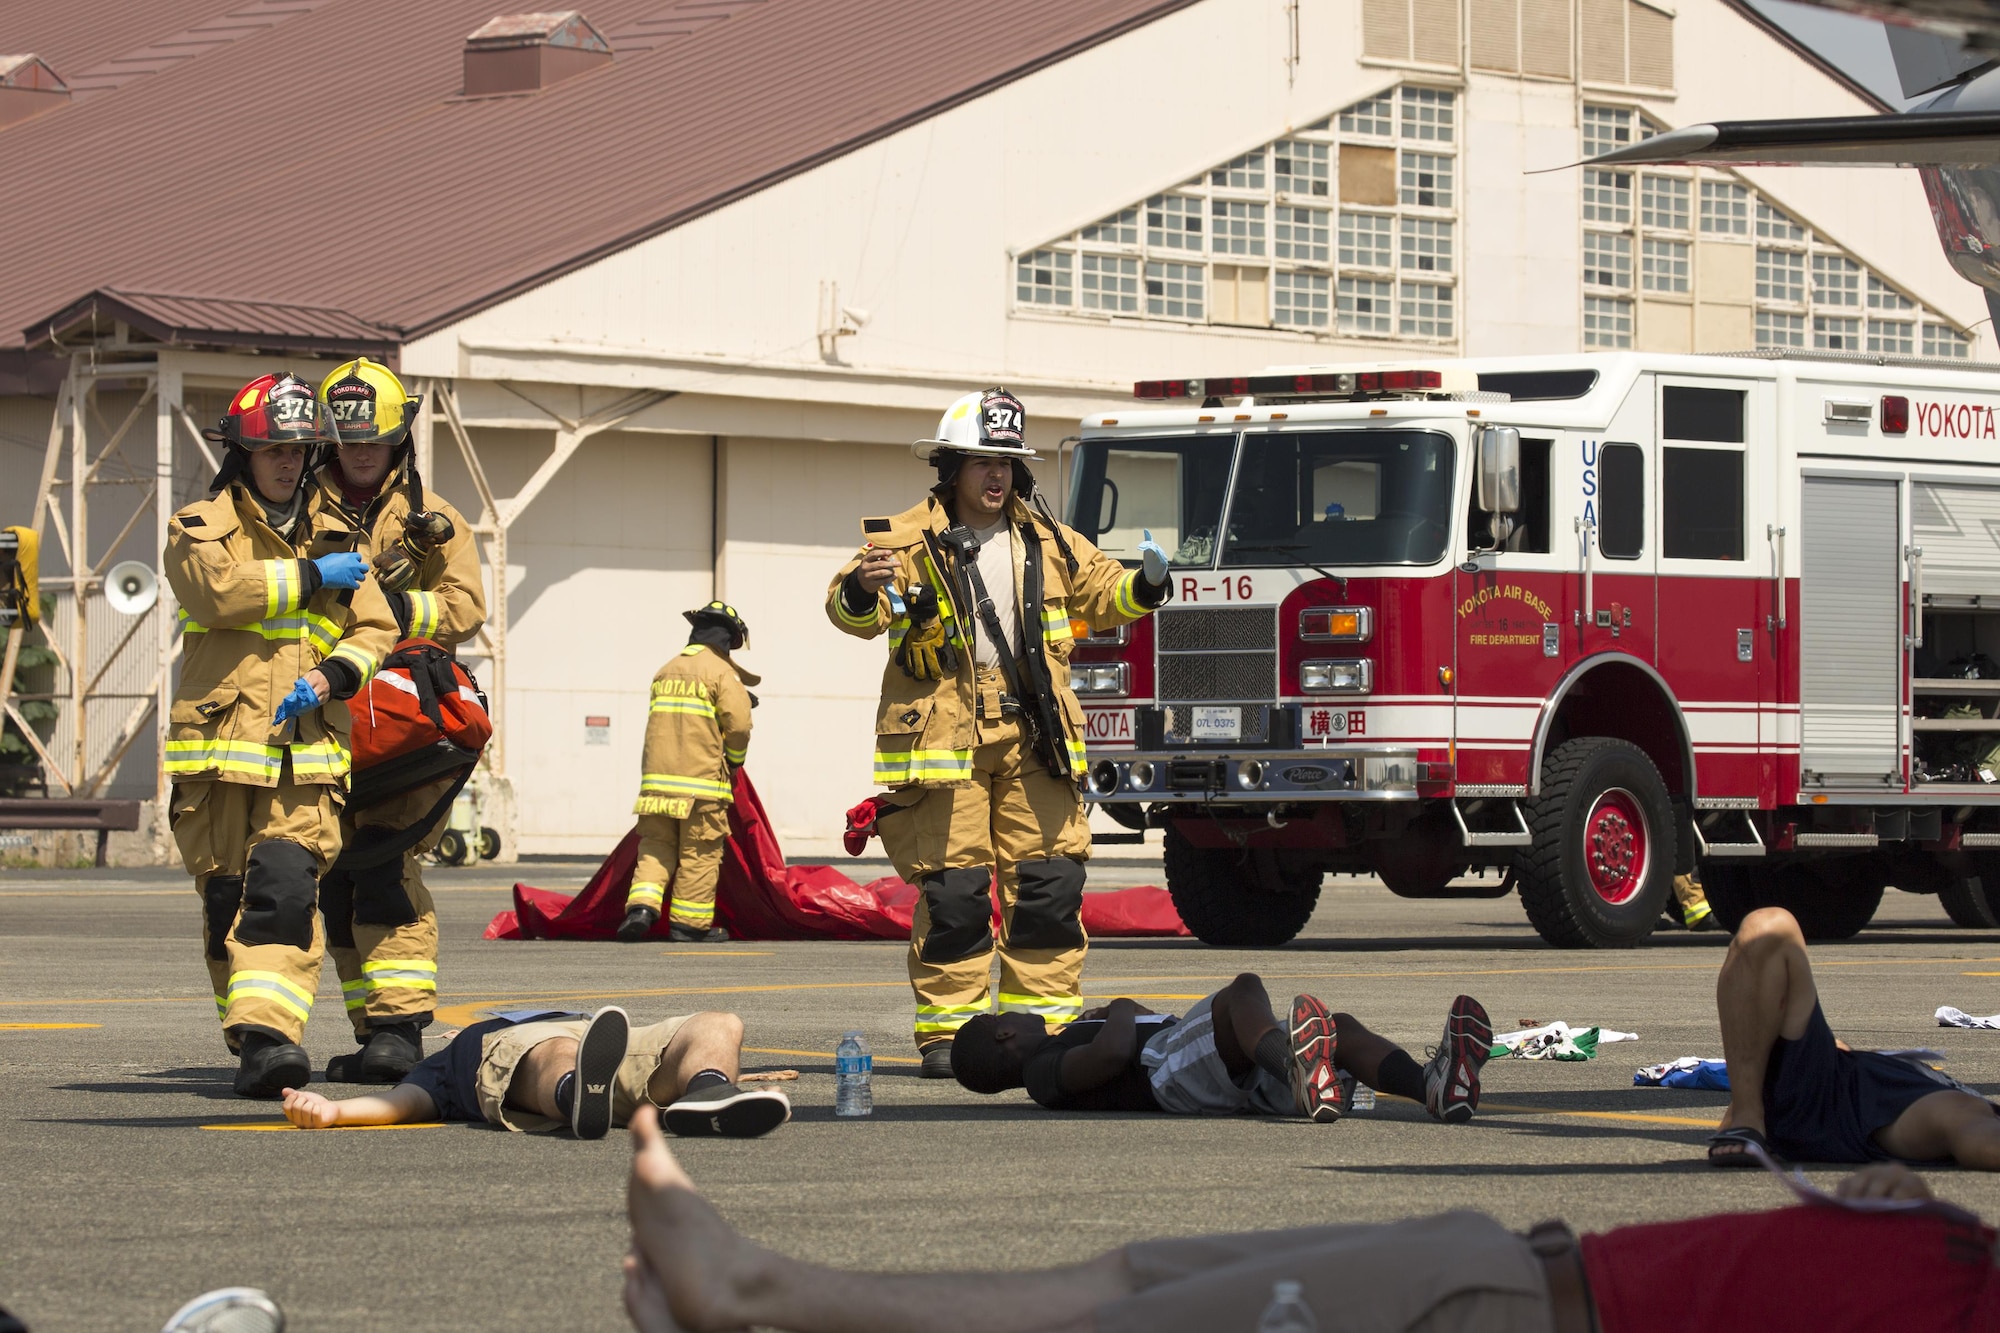 Yokota firefighters arrive on scene during an Emergency Management Exercise at Yokota Air Base, July 13, 2015. First responders have an essential role in exercises and real-world situations, and they continue to train to ensure preparedness for any situation. (U.S. Air Force photo by Osakabe Yasuo/Released) 